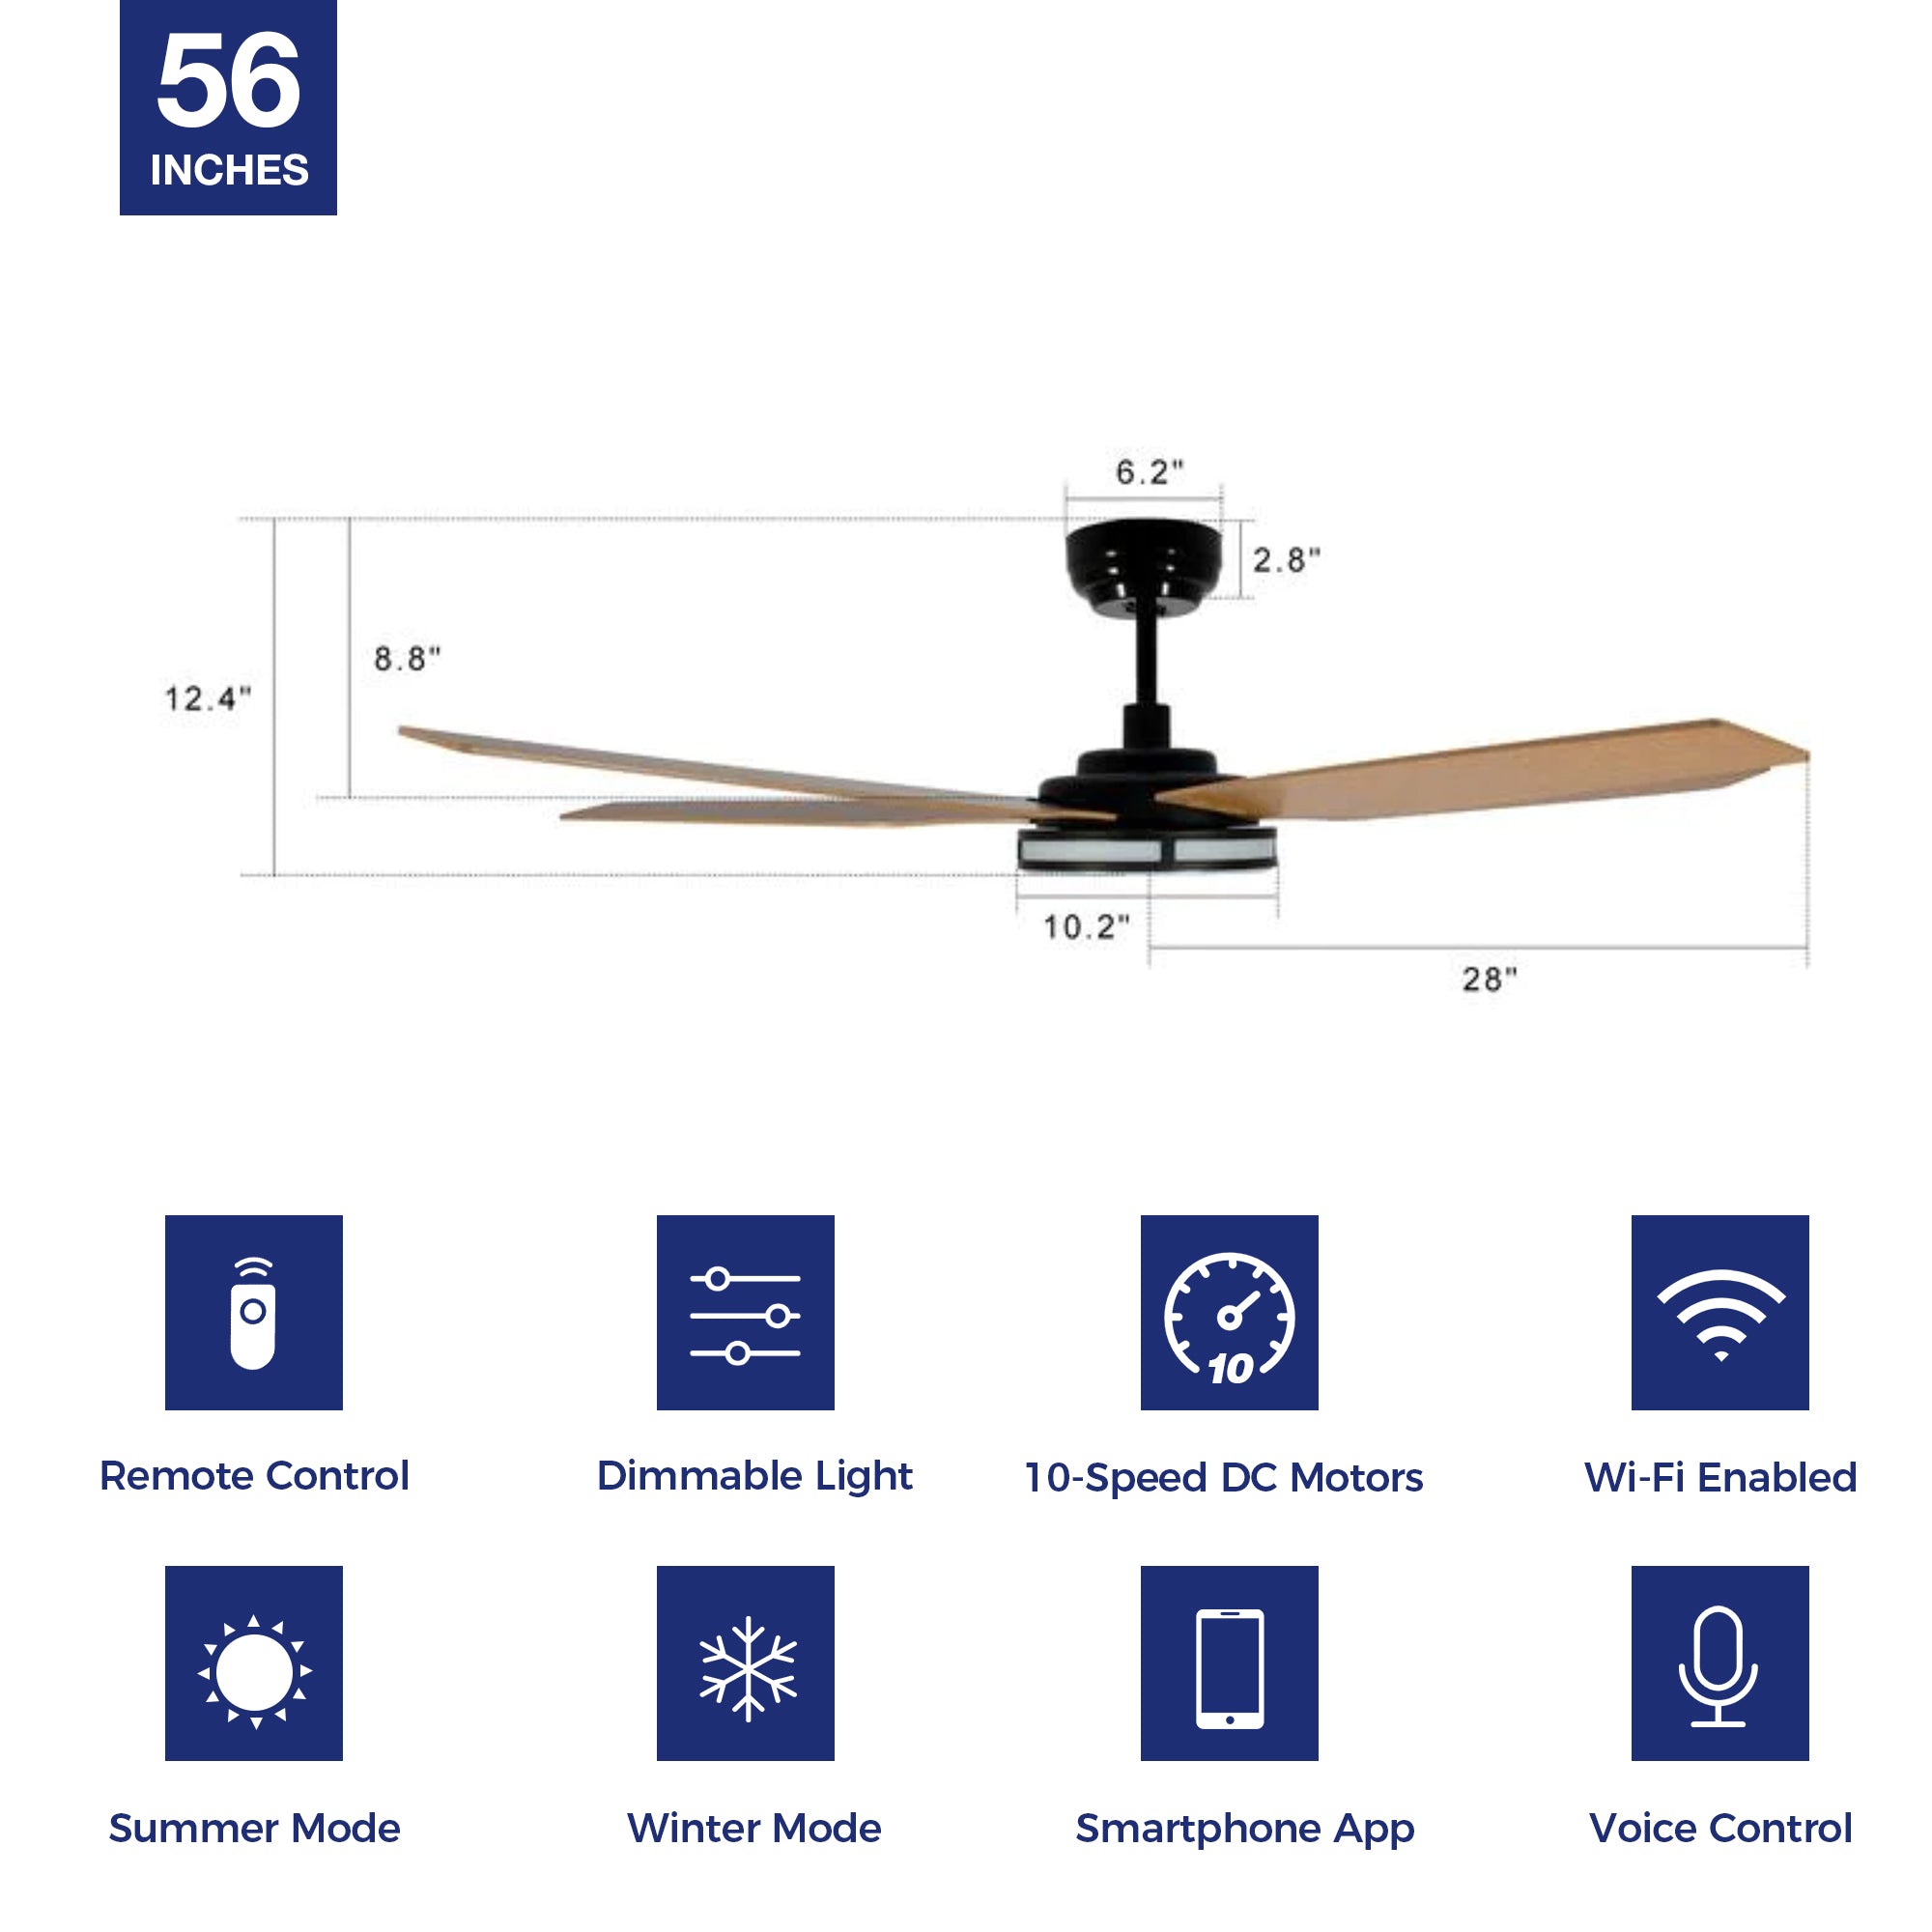 Explorer Outdoor 56&quot; Smart Ceiling Fan with LED Light Kit-Black Case and Wood Grain Fan Blades. The fan features Remote control, Wi-Fi apps, and Voice control technology (compatible with Amazon Alexa and Google Home Assistant ) to set fan preferences. Equipped with 3000-lumen dimmable LED lights and a 10-speed DC Motor (5300CFM airflow output), it brings you cool and bright. 